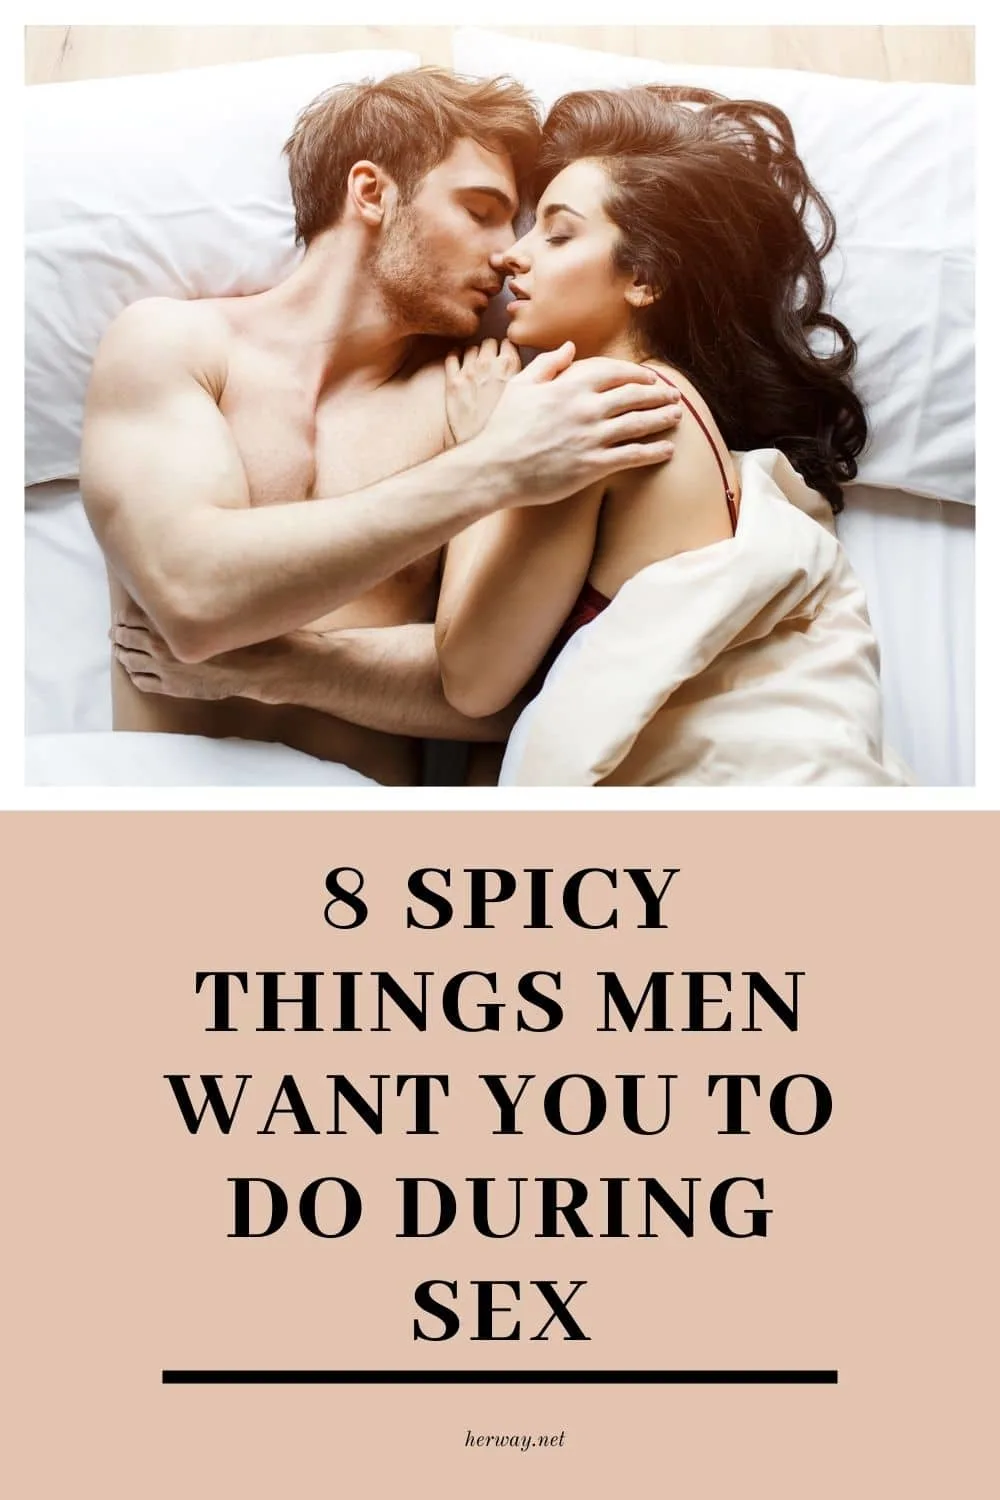 8 Spicy Things Men Want You To Do During Sex